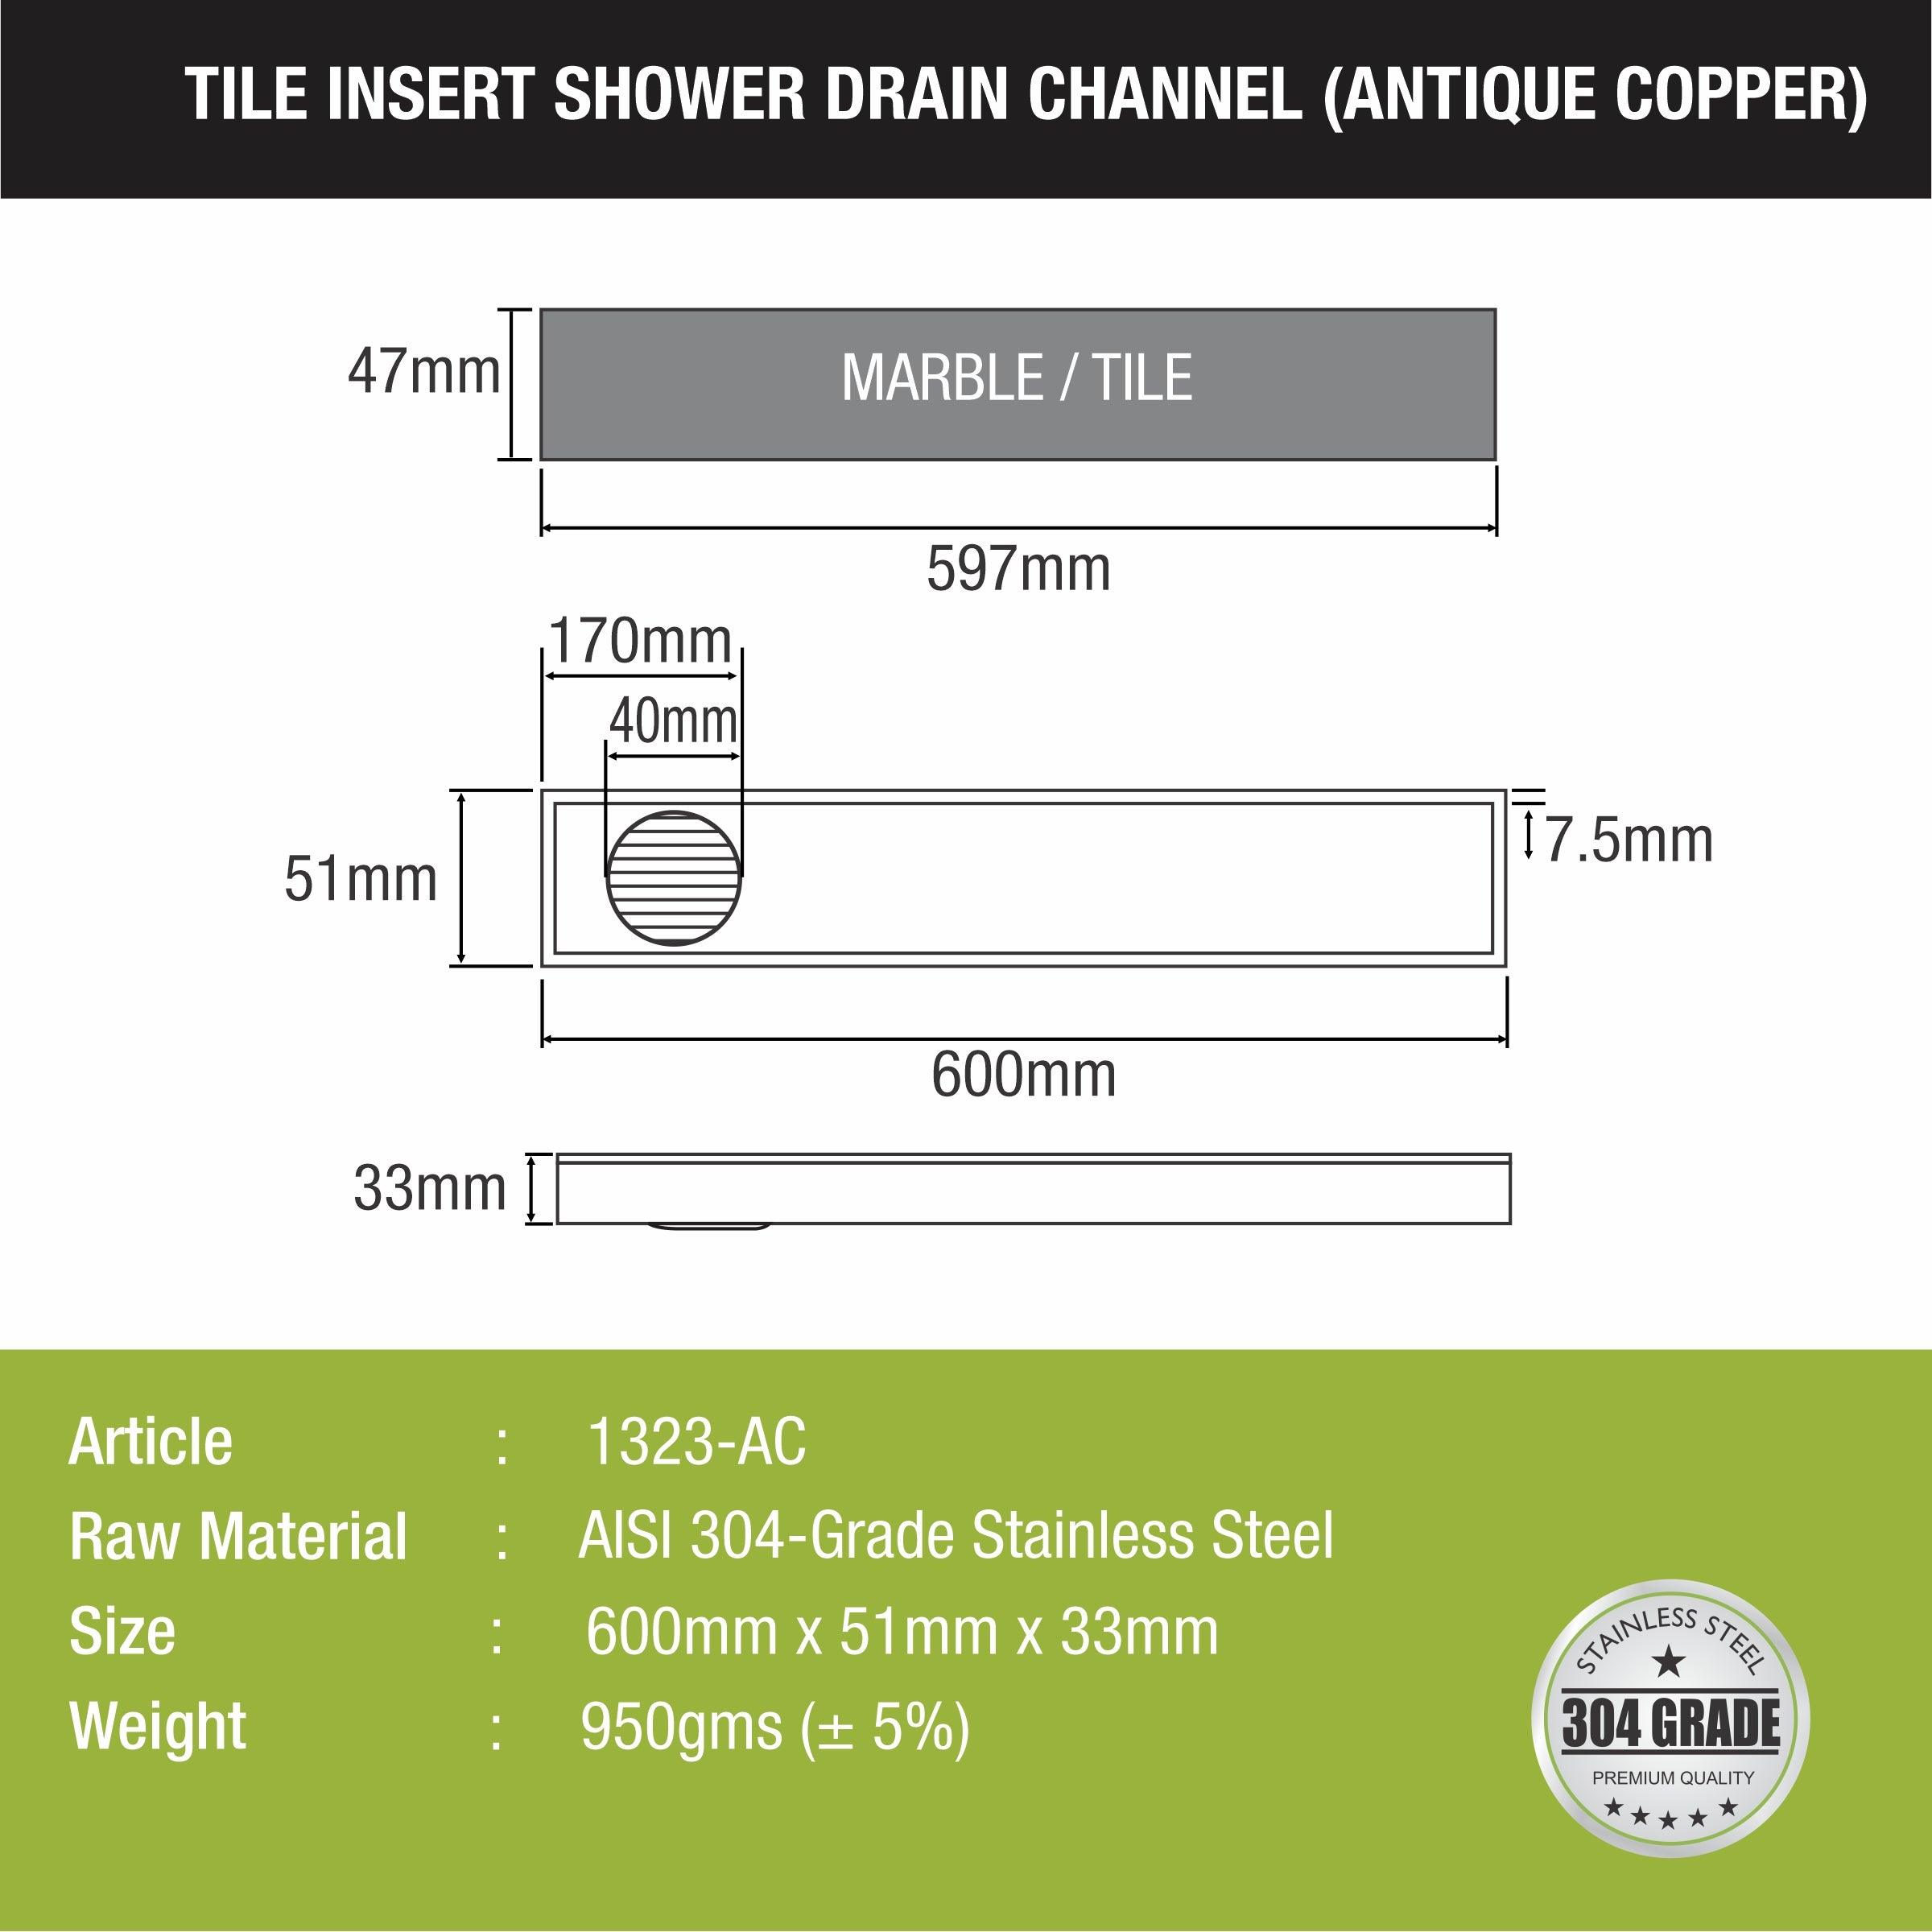 Tile Insert Shower Drain Channel - Antique Copper (24 x 2 Inches) sizes and dimensions